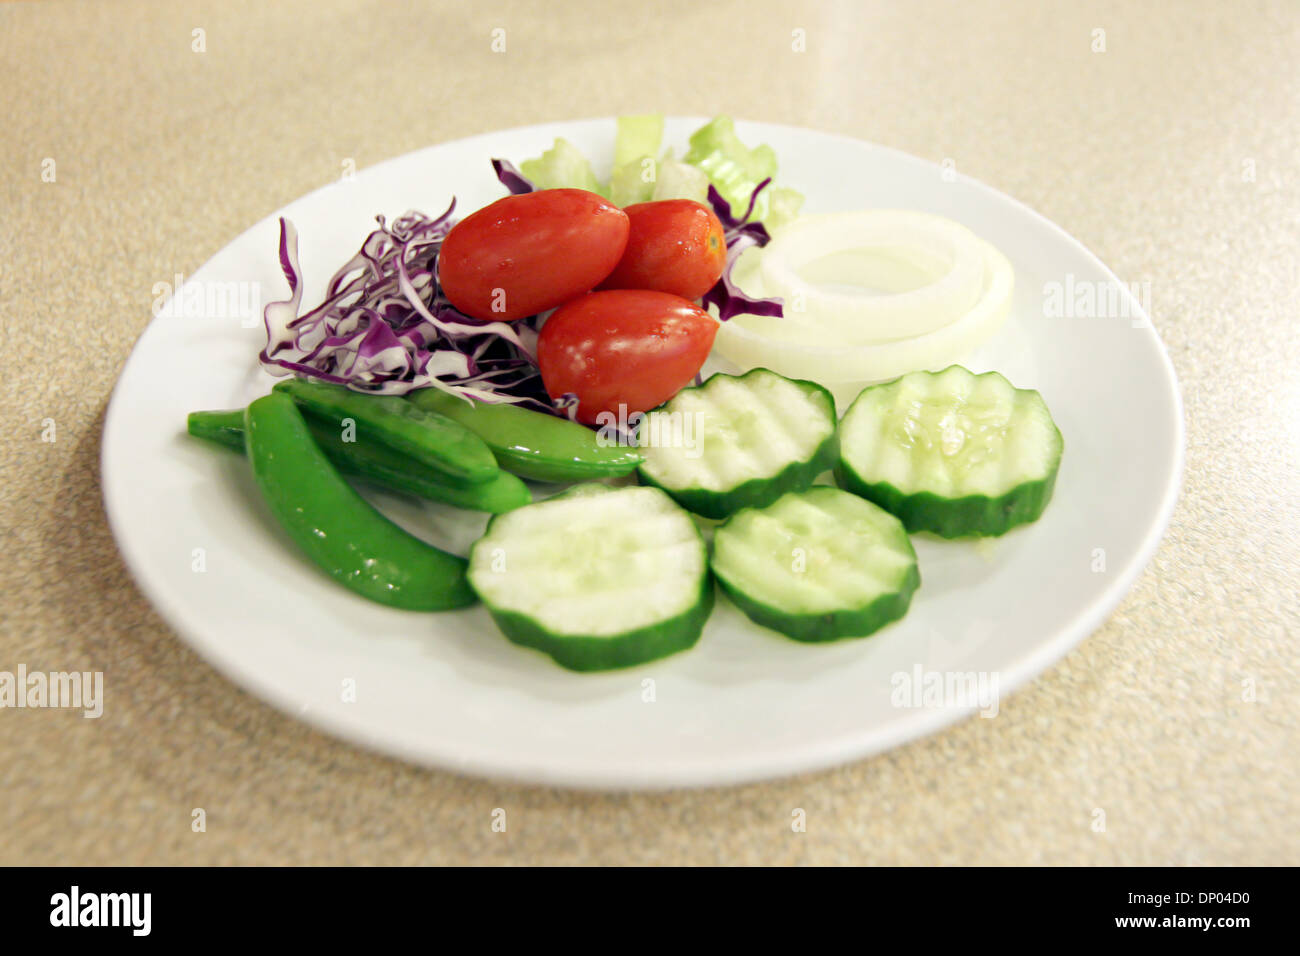 Tomato and cucumber placed on white dish. Stock Photo